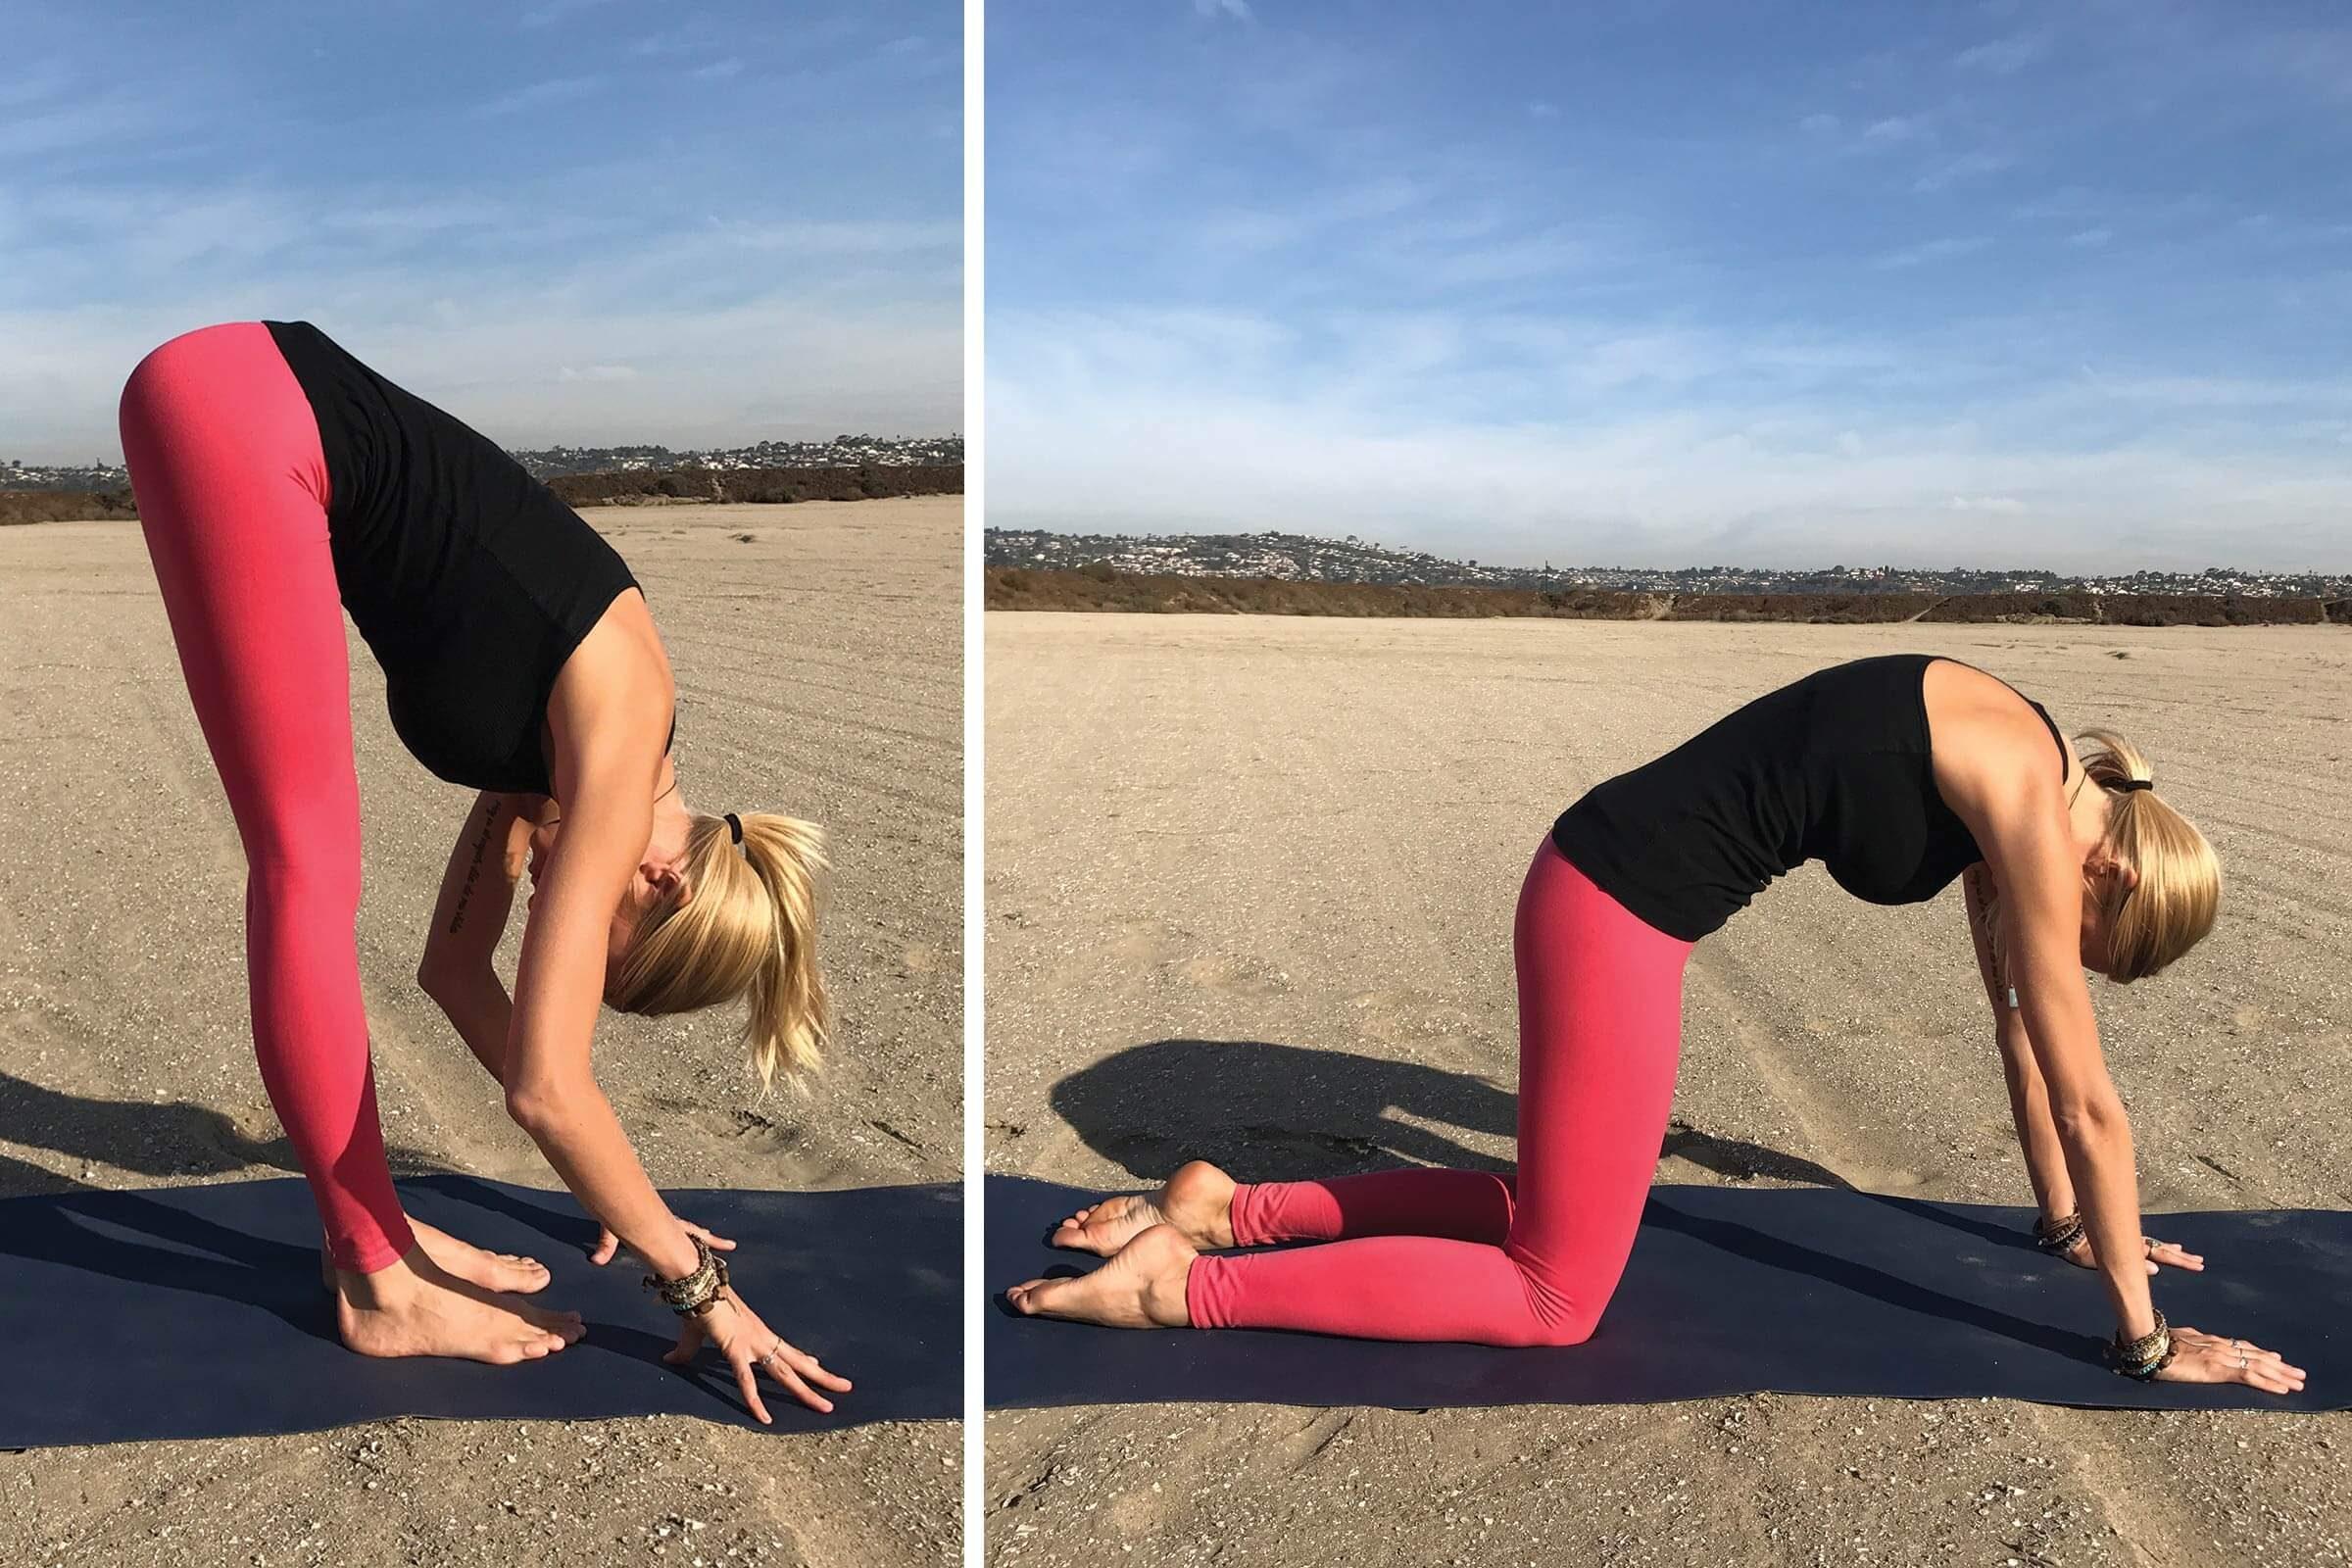 Yoga for Digestion: The Yoga Routine for Better Digestion